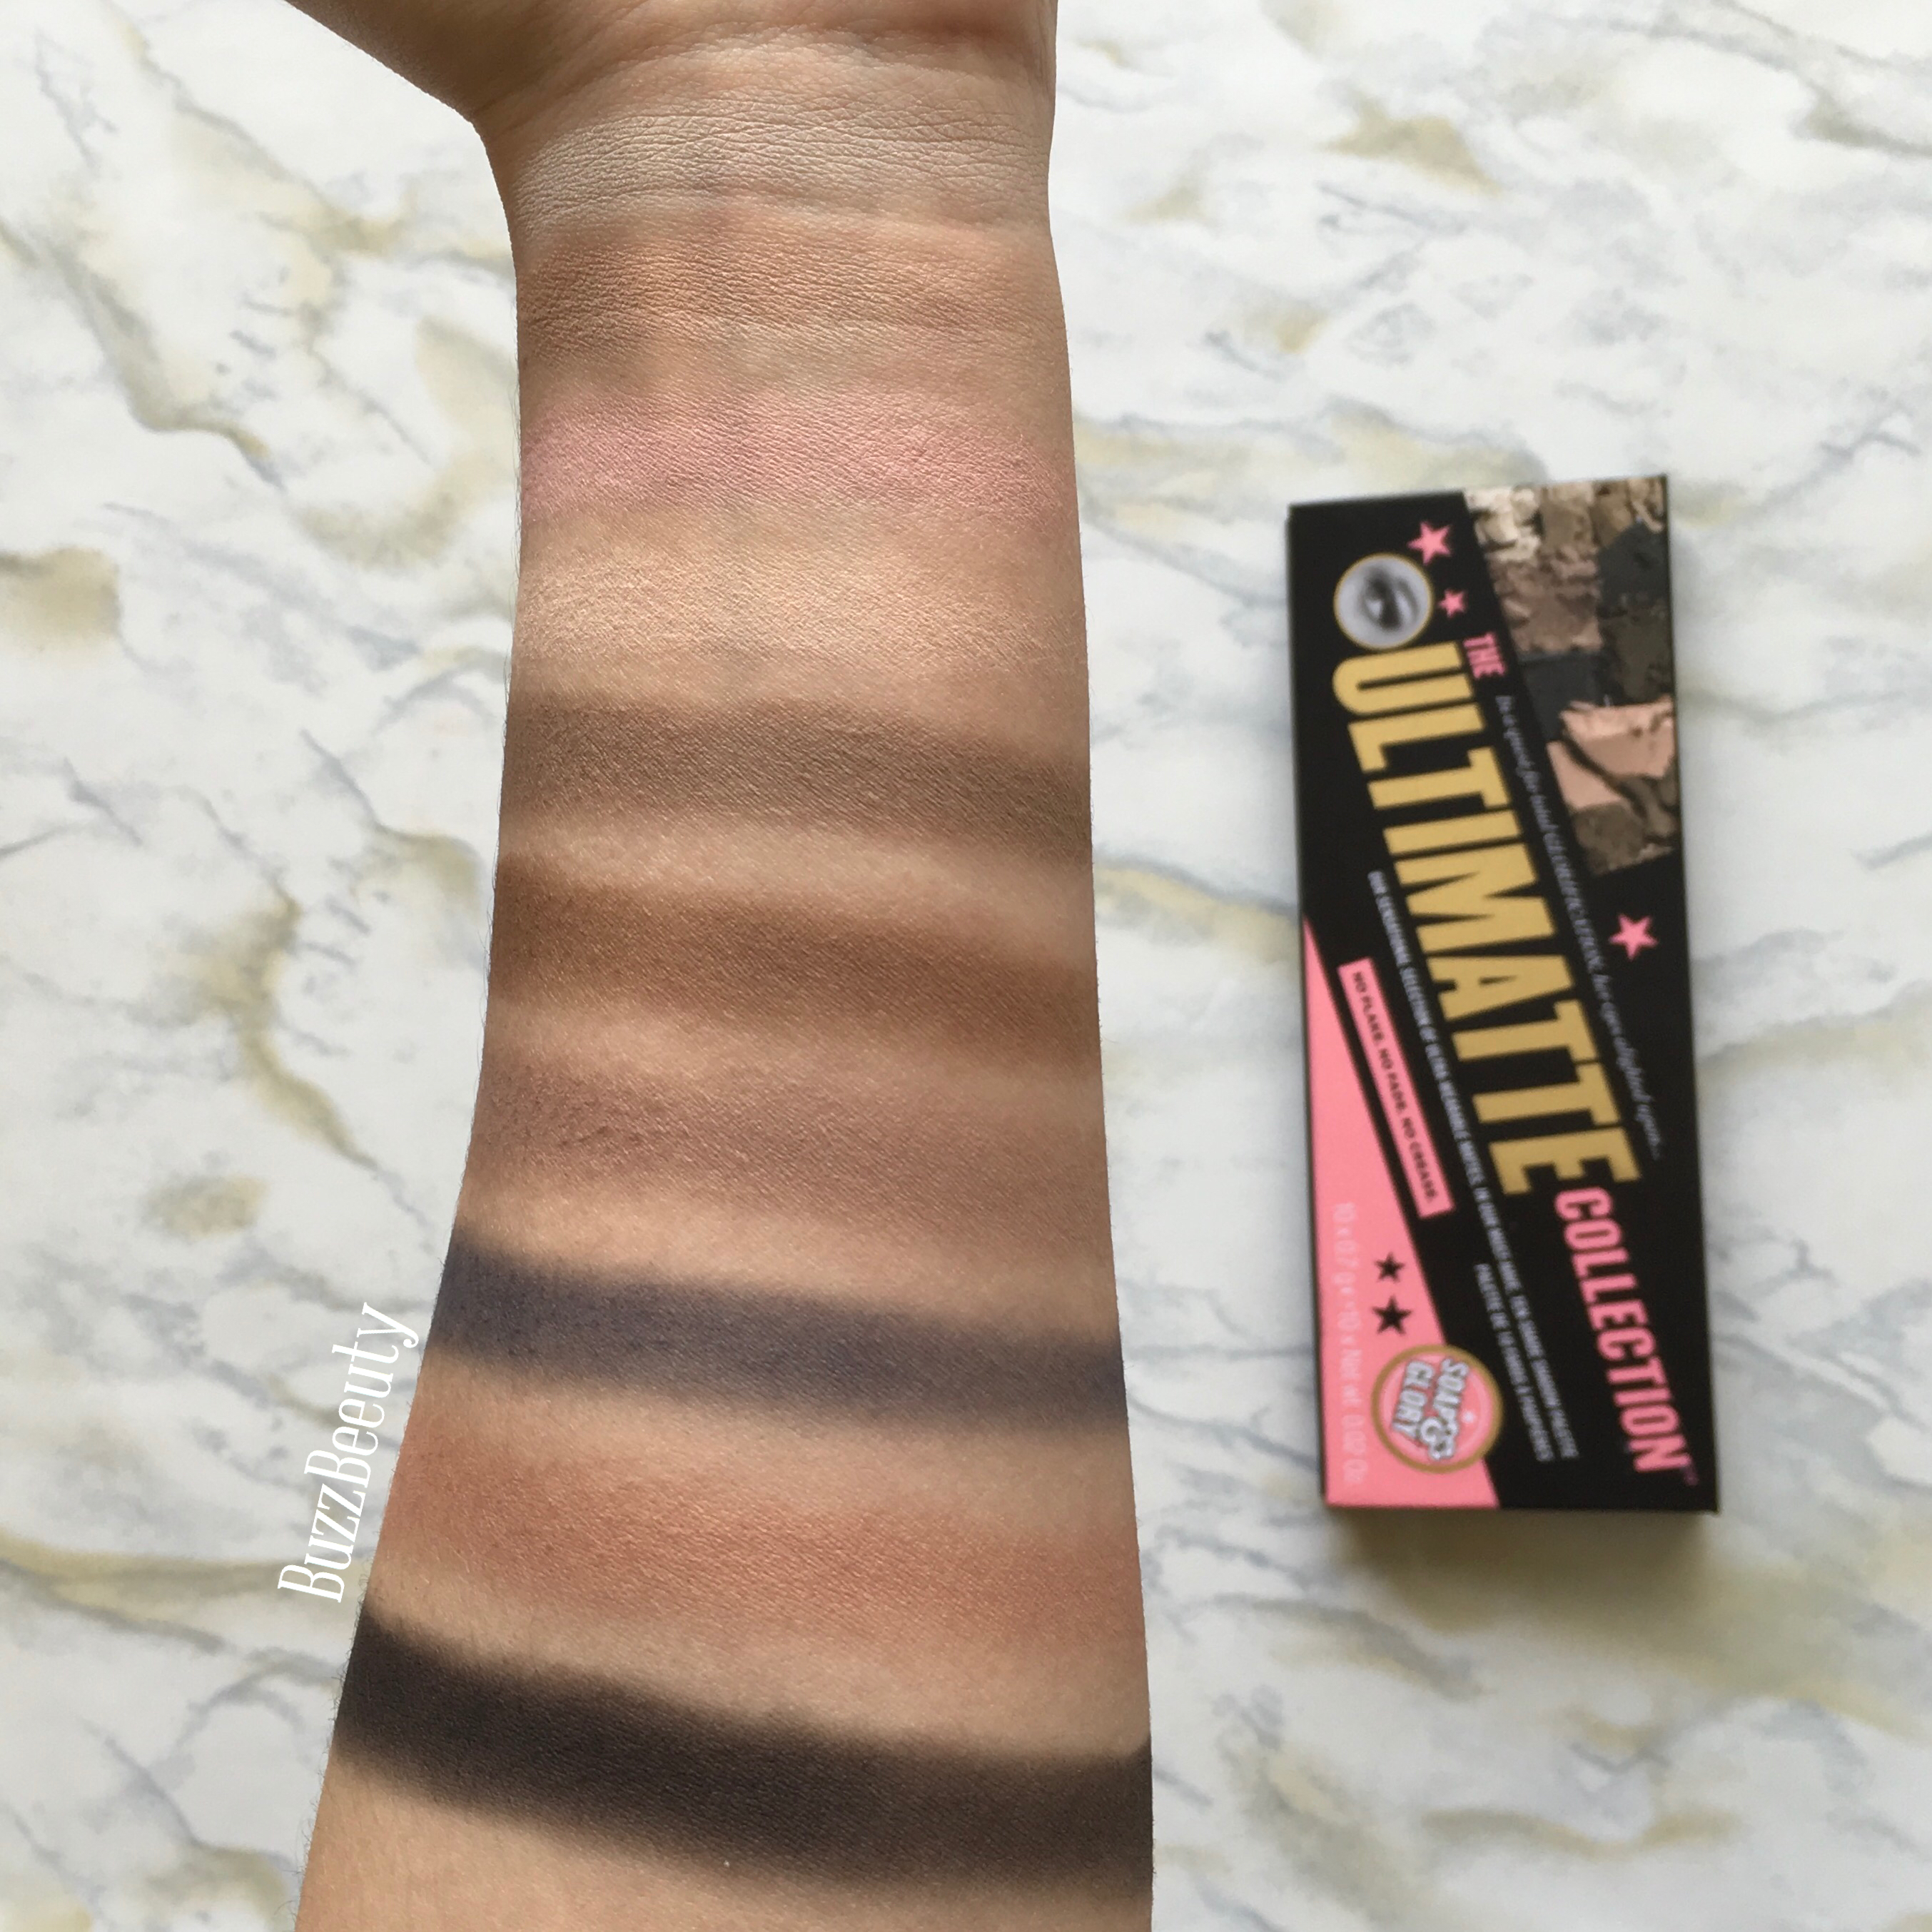 Soap & Glory The Ultimatte Collection Palette swatches